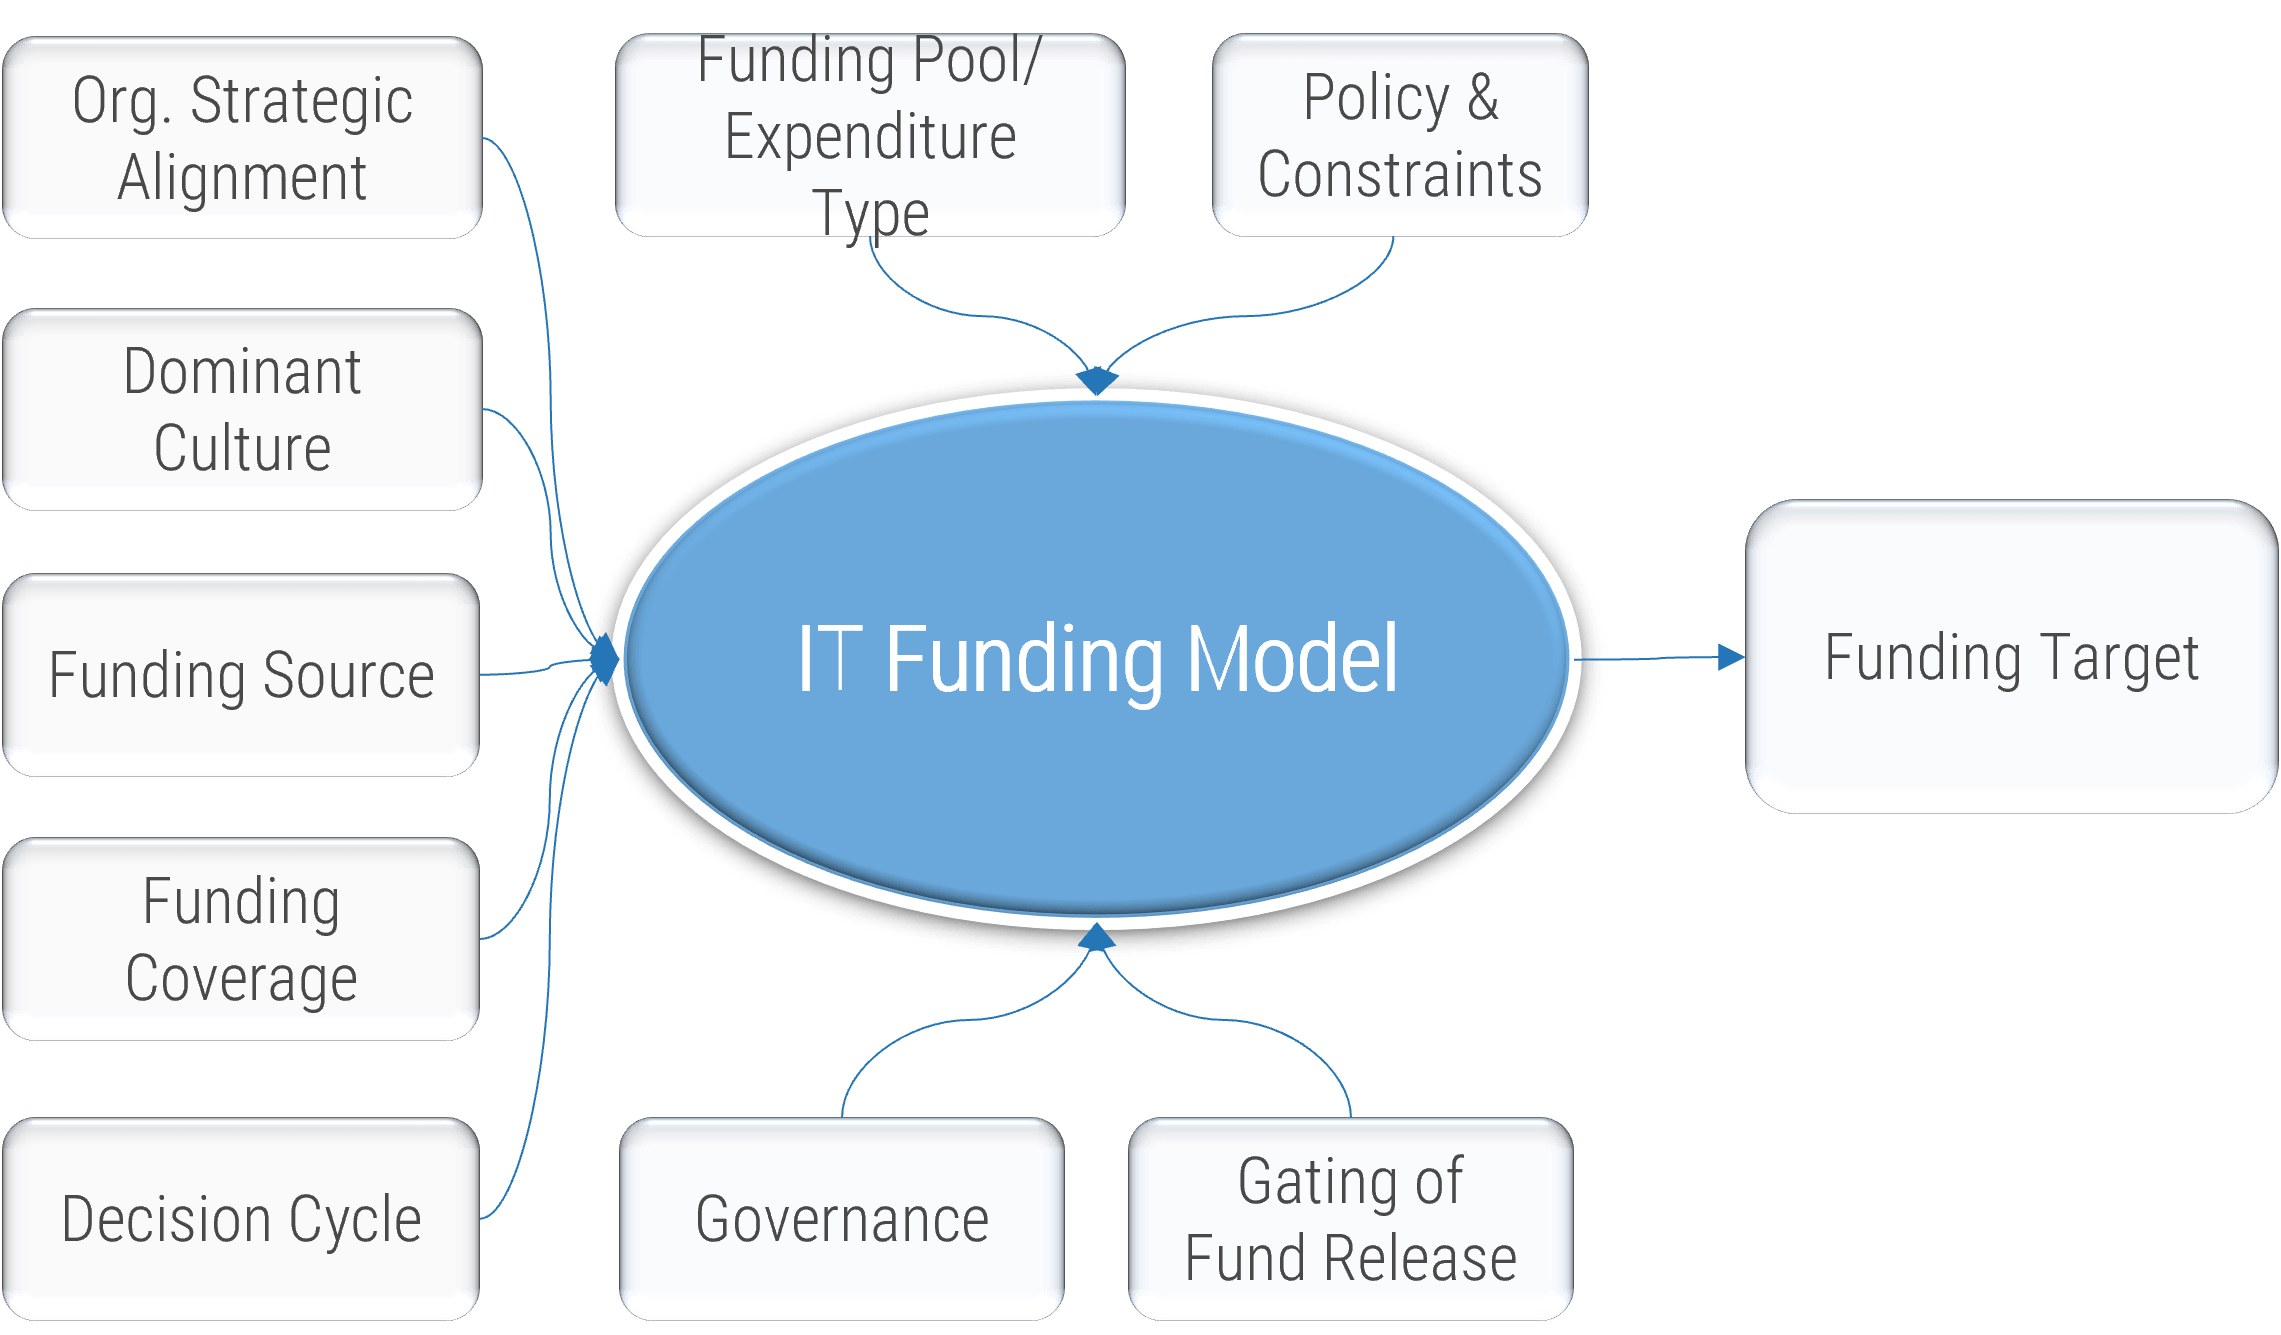 The image contains a screenshot of the IT Funding Model.